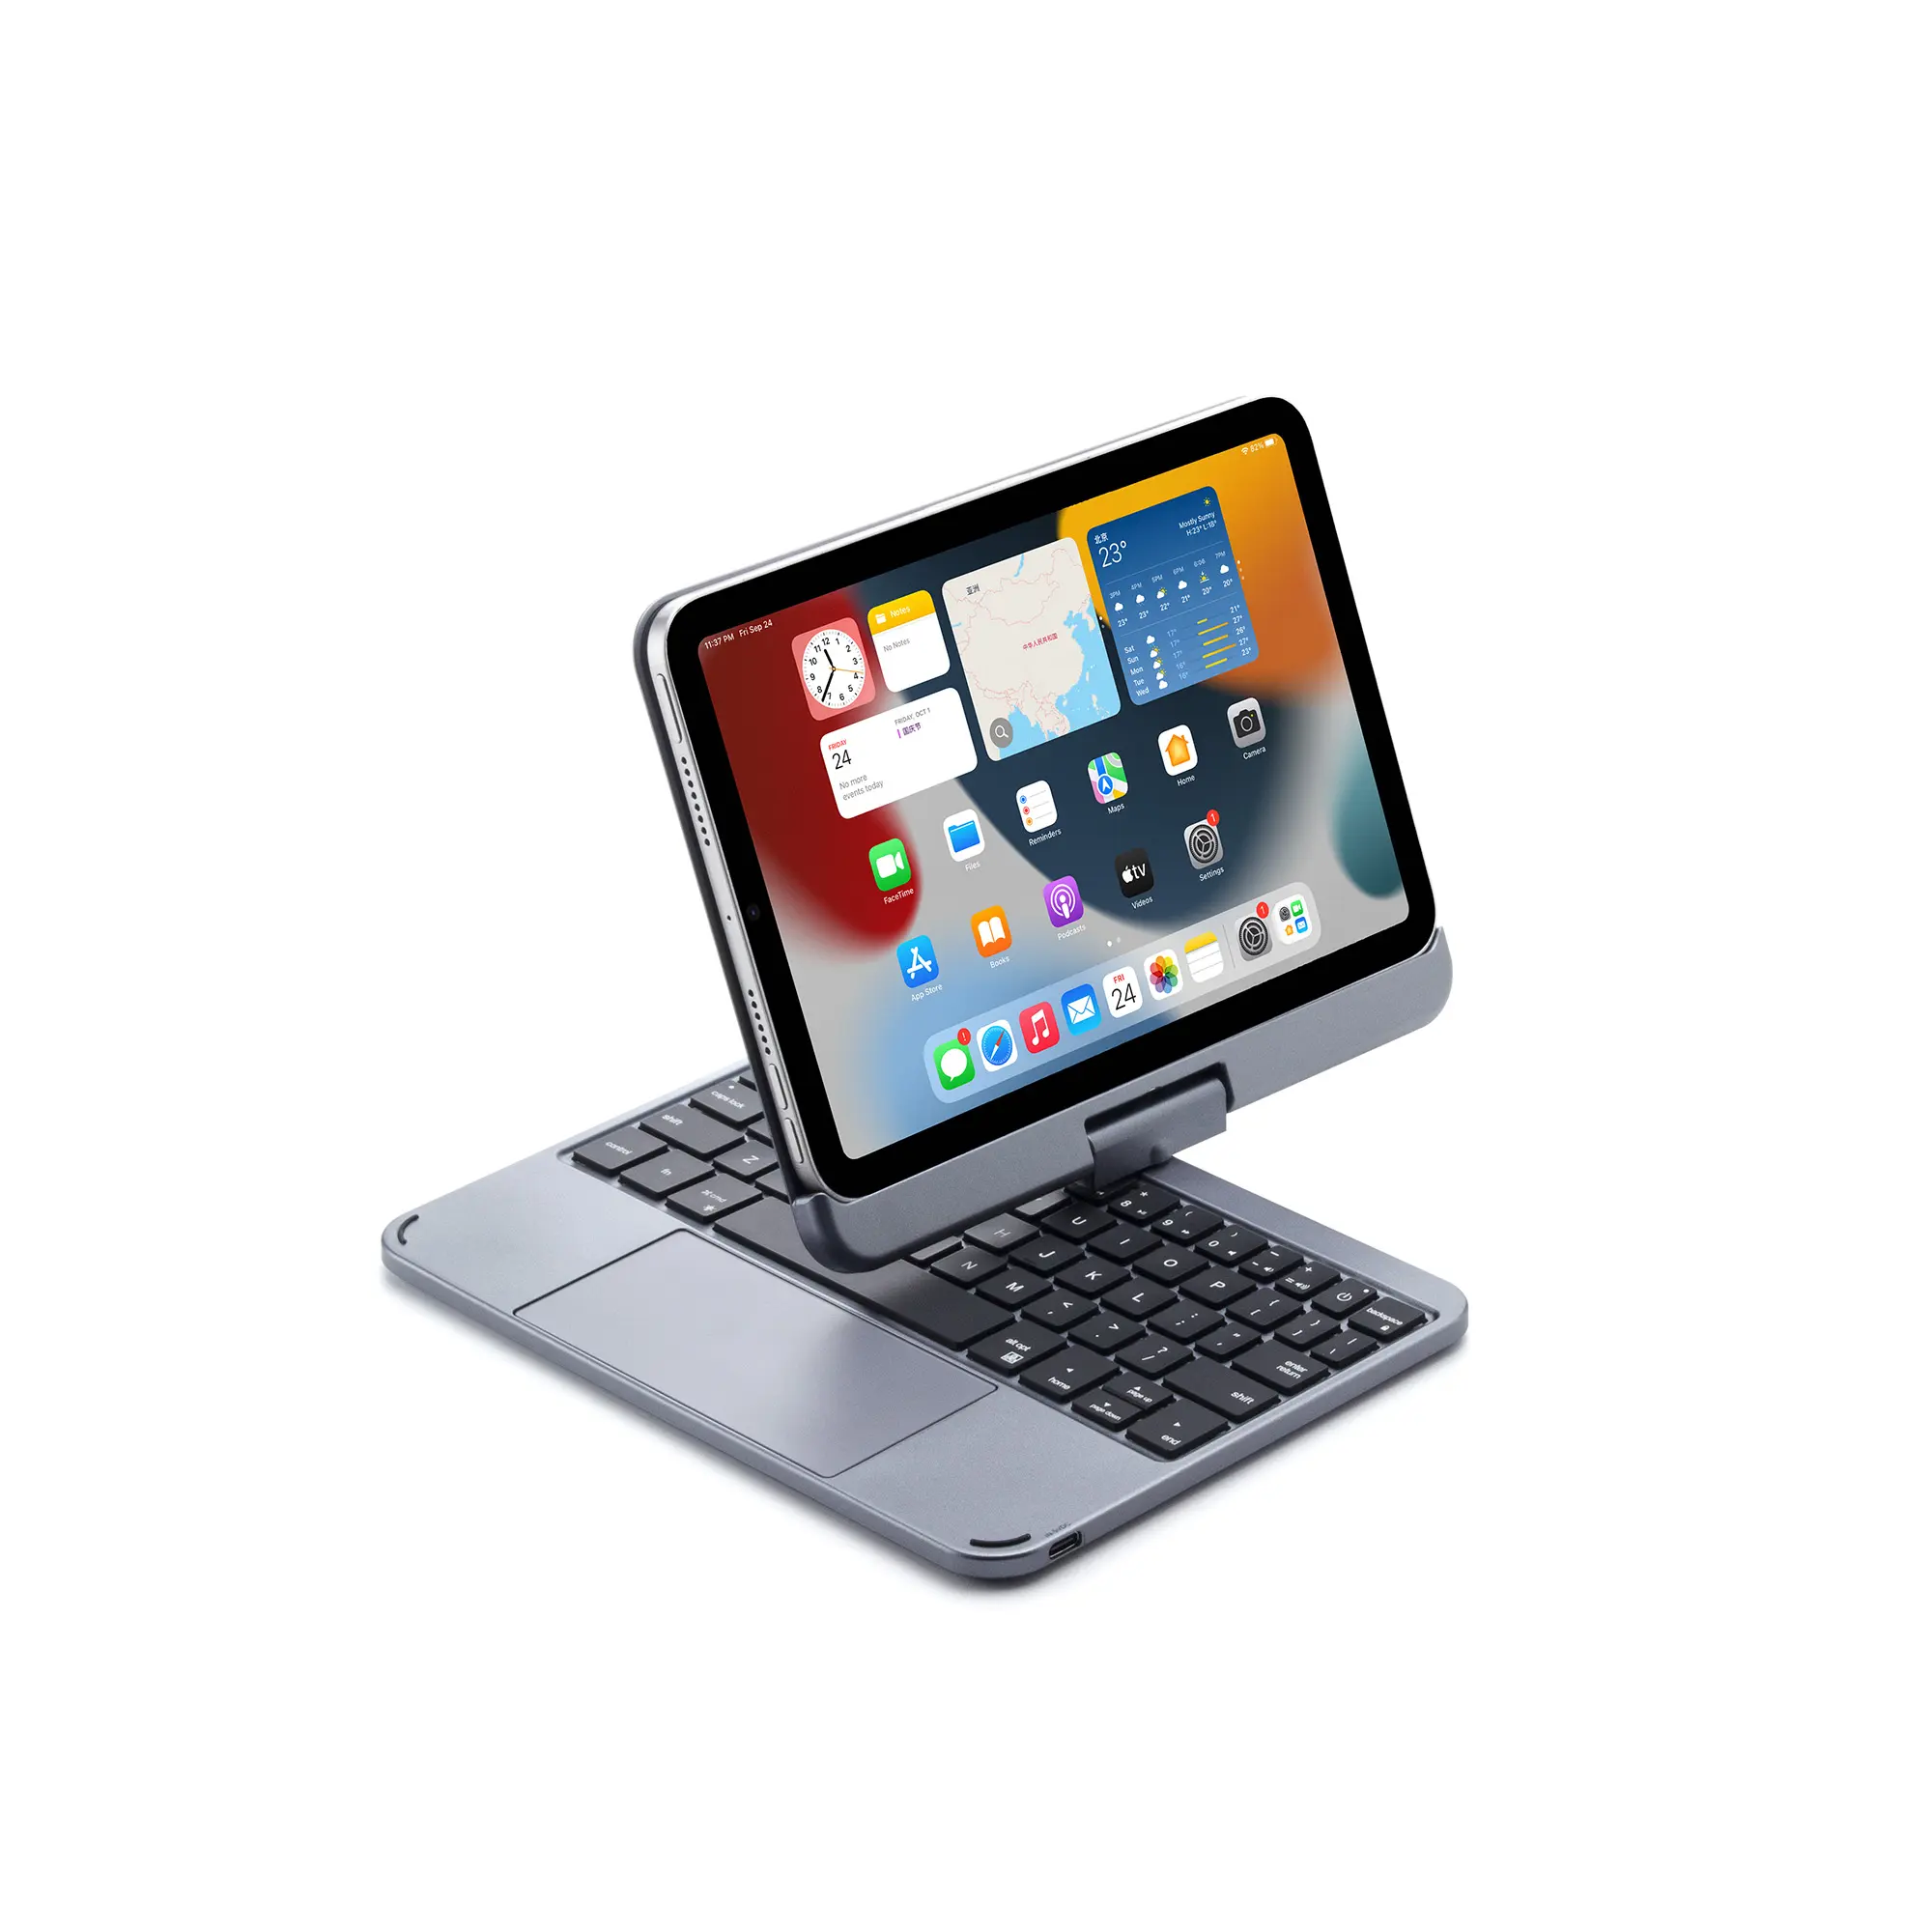 2022 New magnetic magic style backlit keys wireless keyboard case for ipad mini 6 8.3 inch ABS material